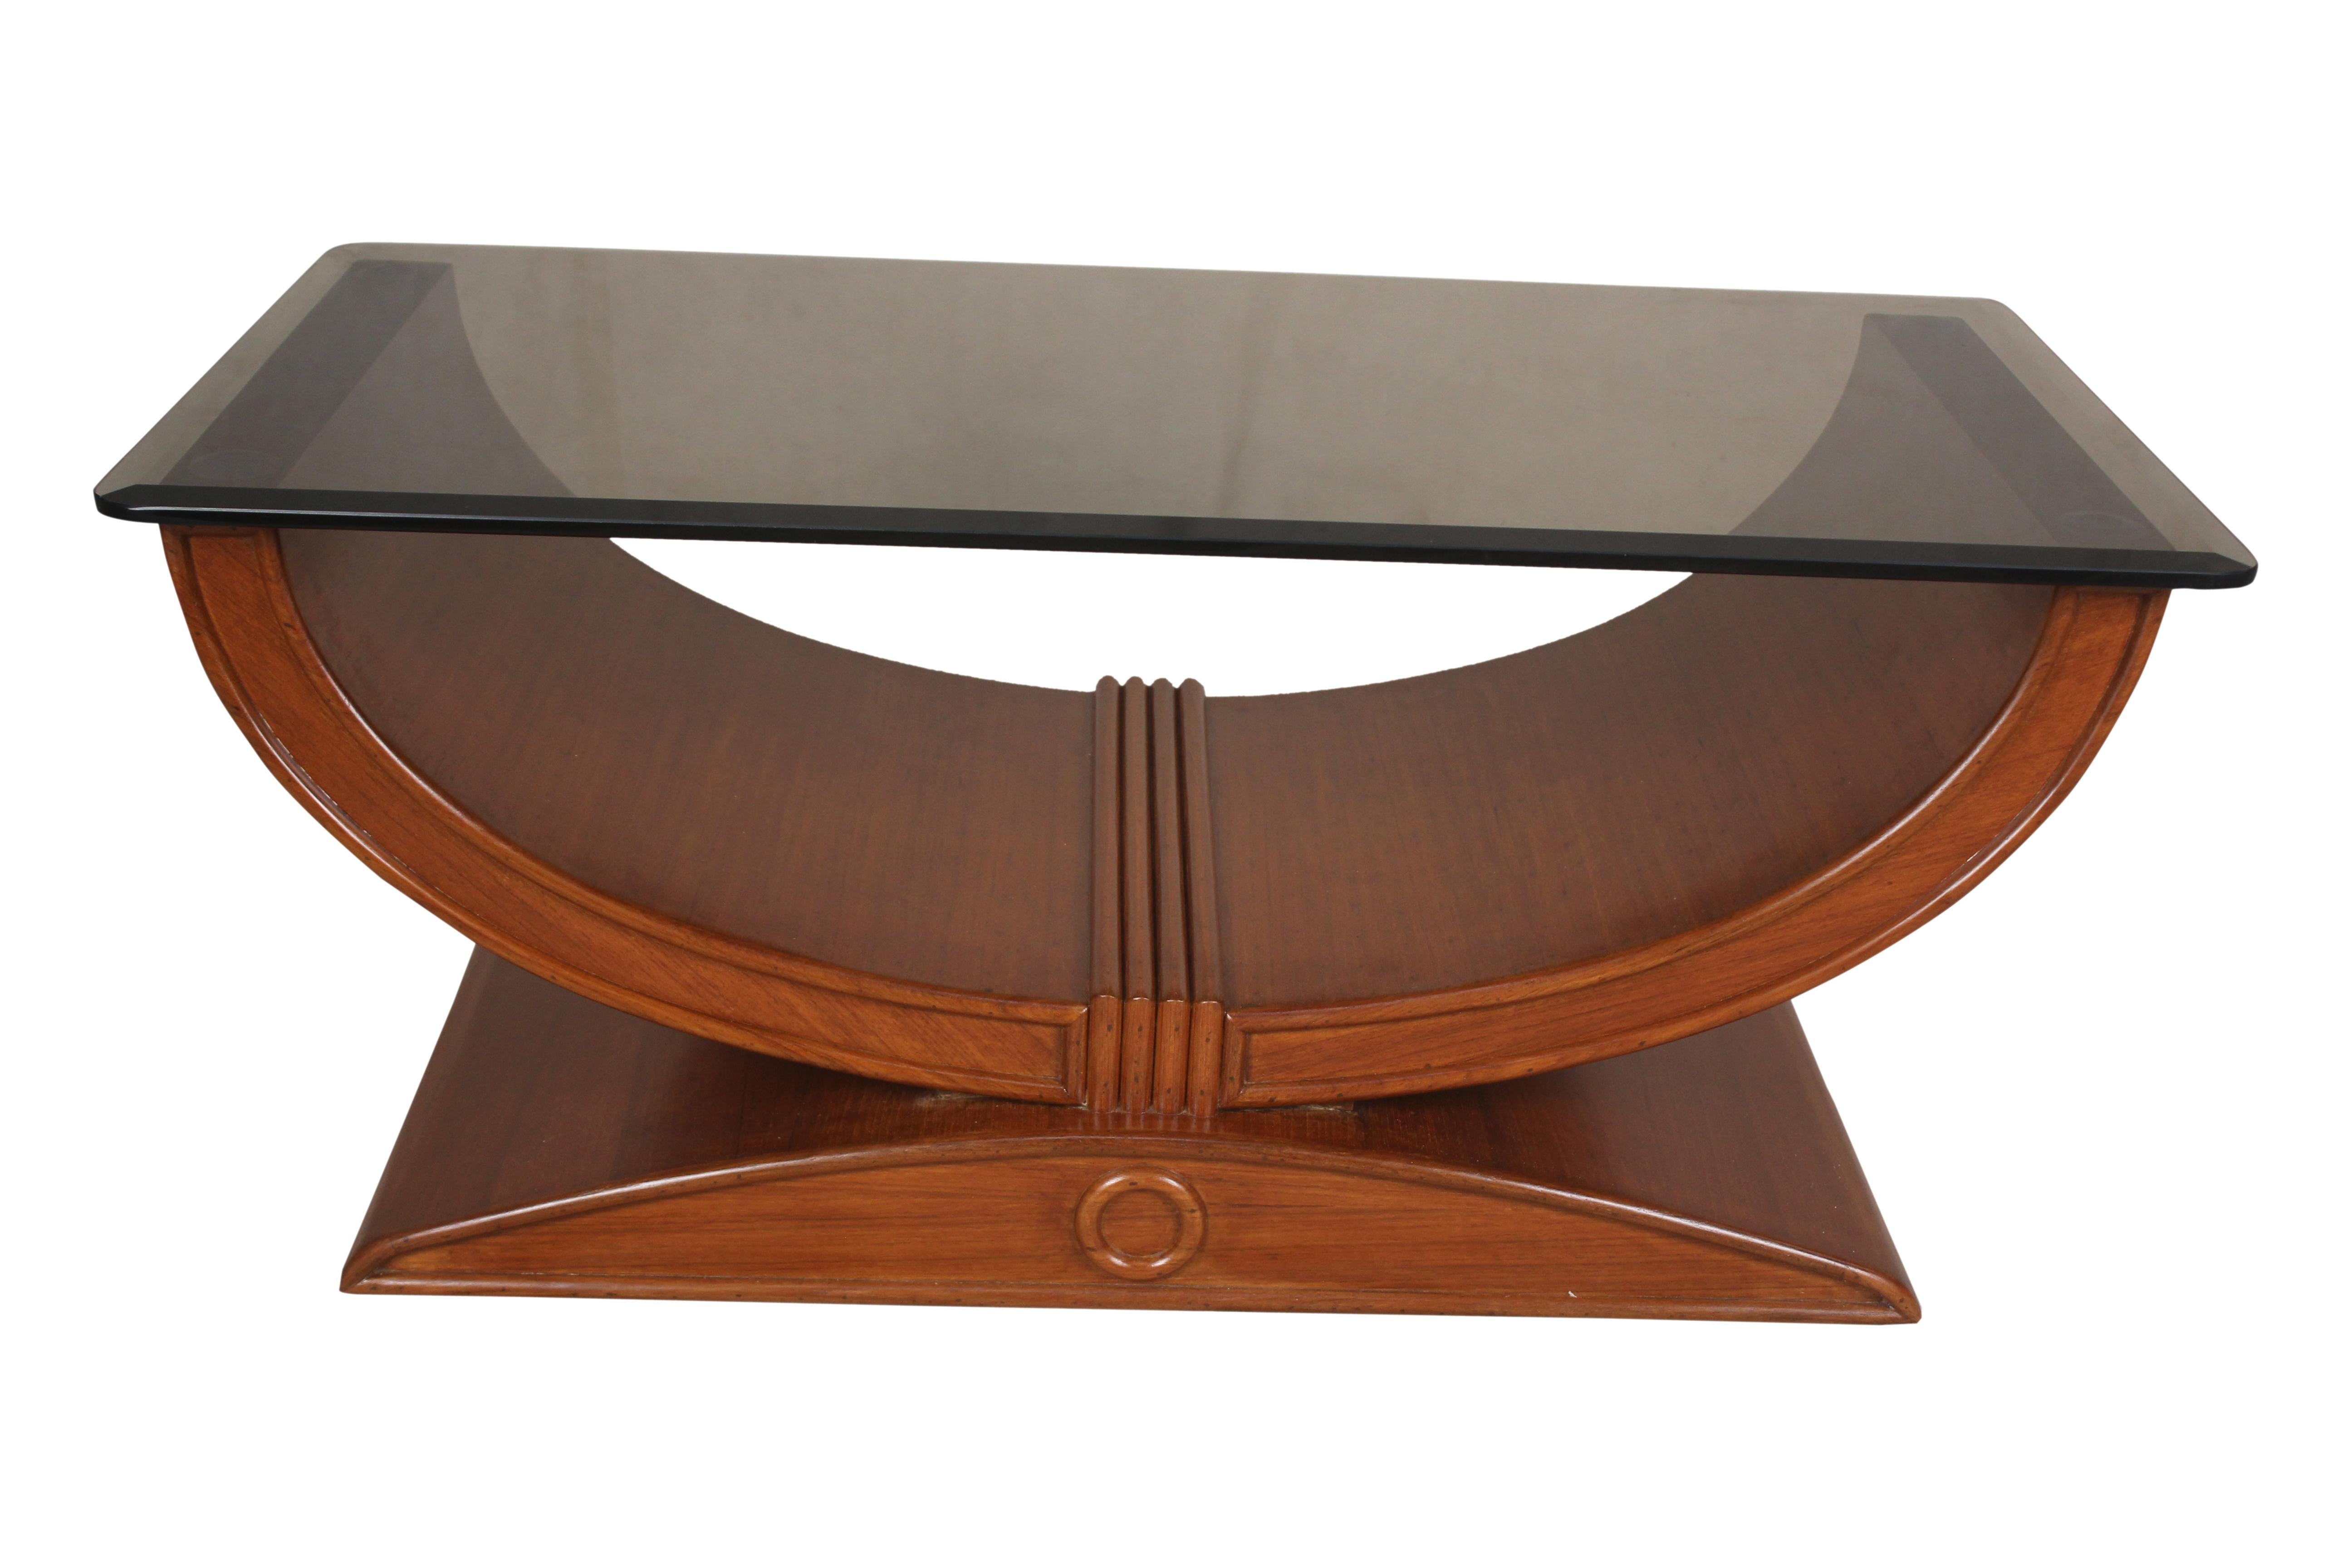 An outstanding U-shaped teak wood cocktail or coffee table from the Art Deco period. Features a beveled, smoked glass top. The generous size could also make a great console table or credenza for a flat screen television. European.